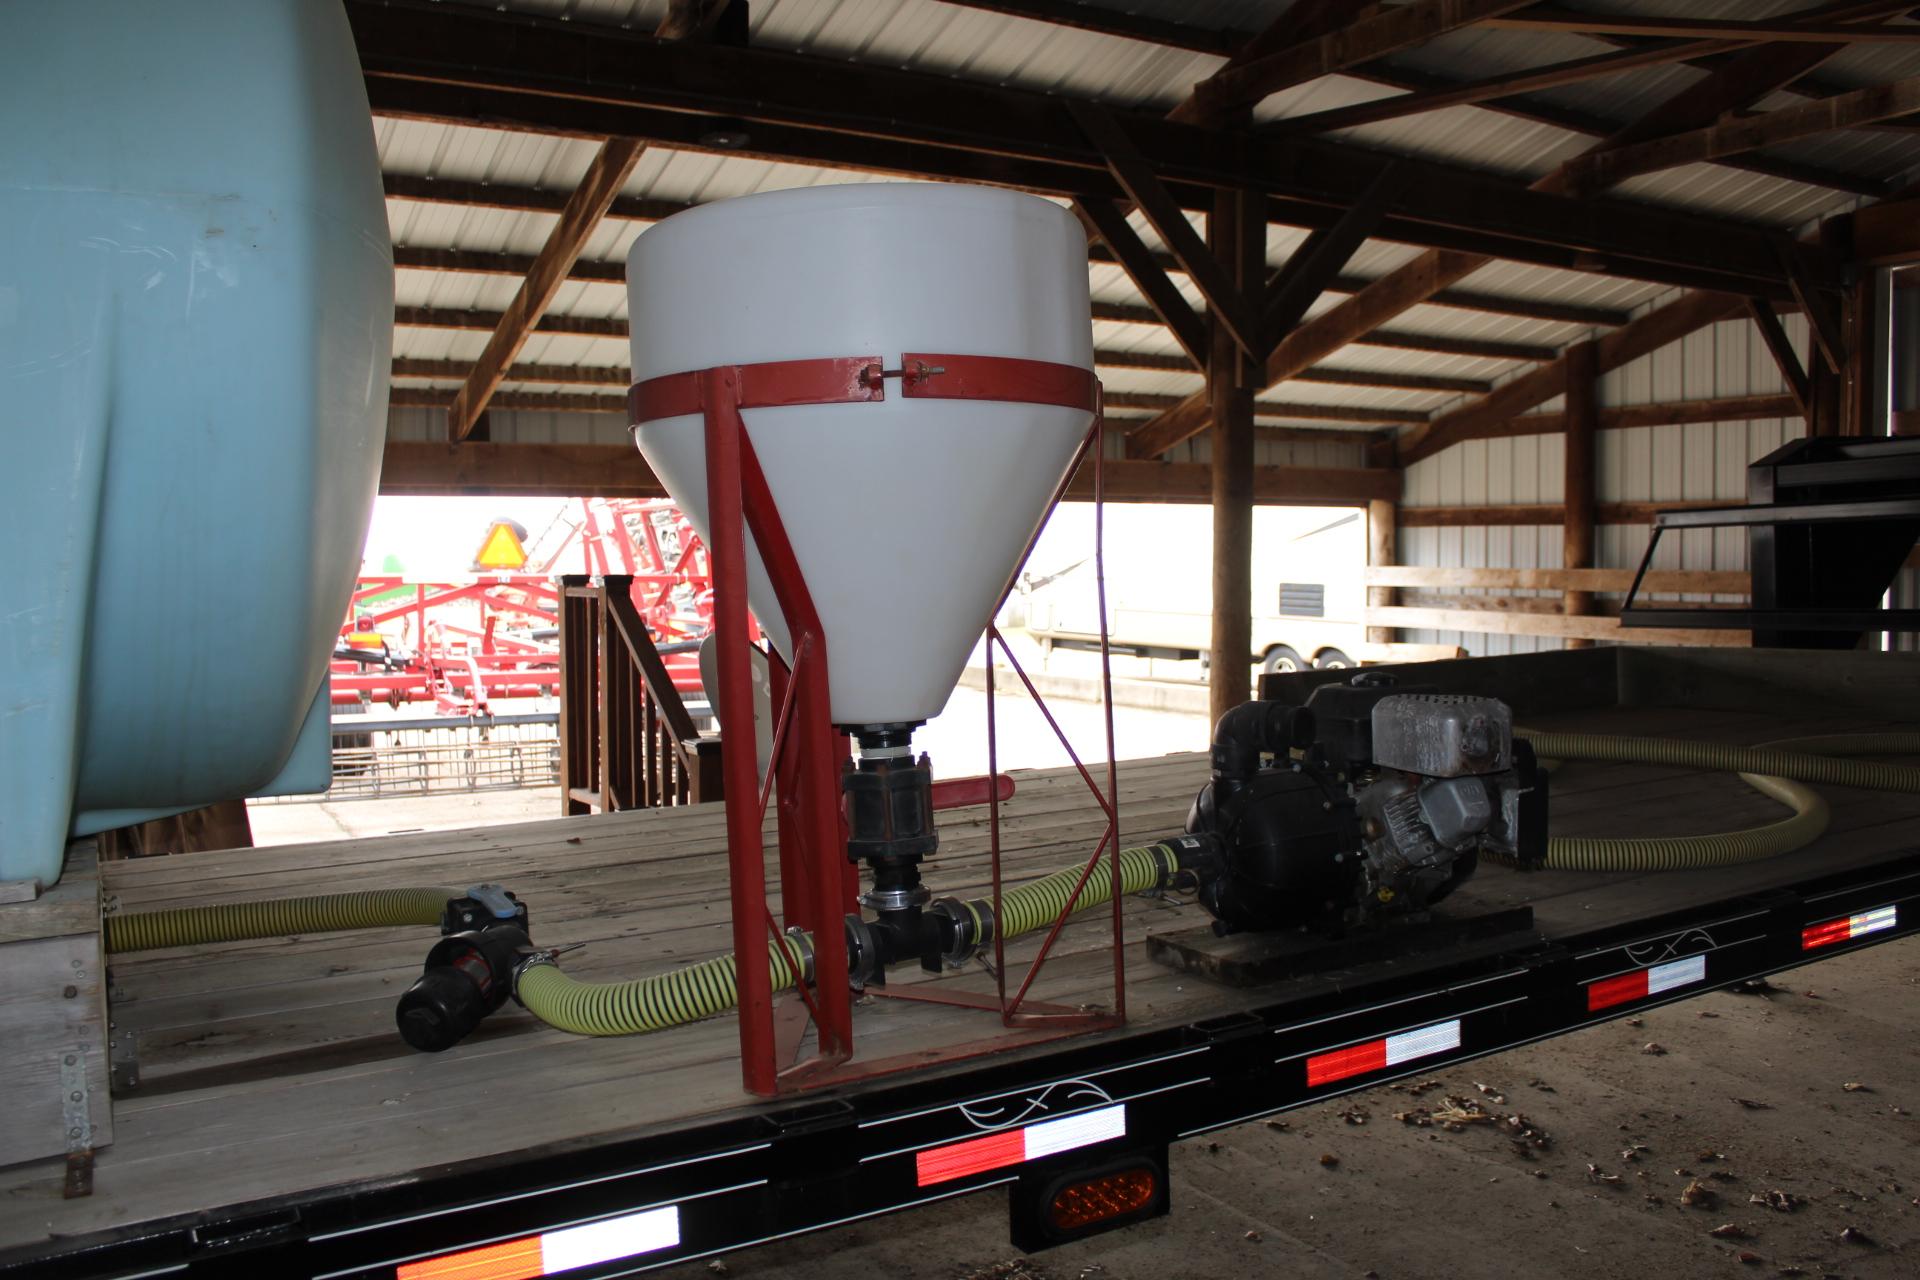 30 GALLON IND CONE, POLY CONE NEW THIS YEAR,